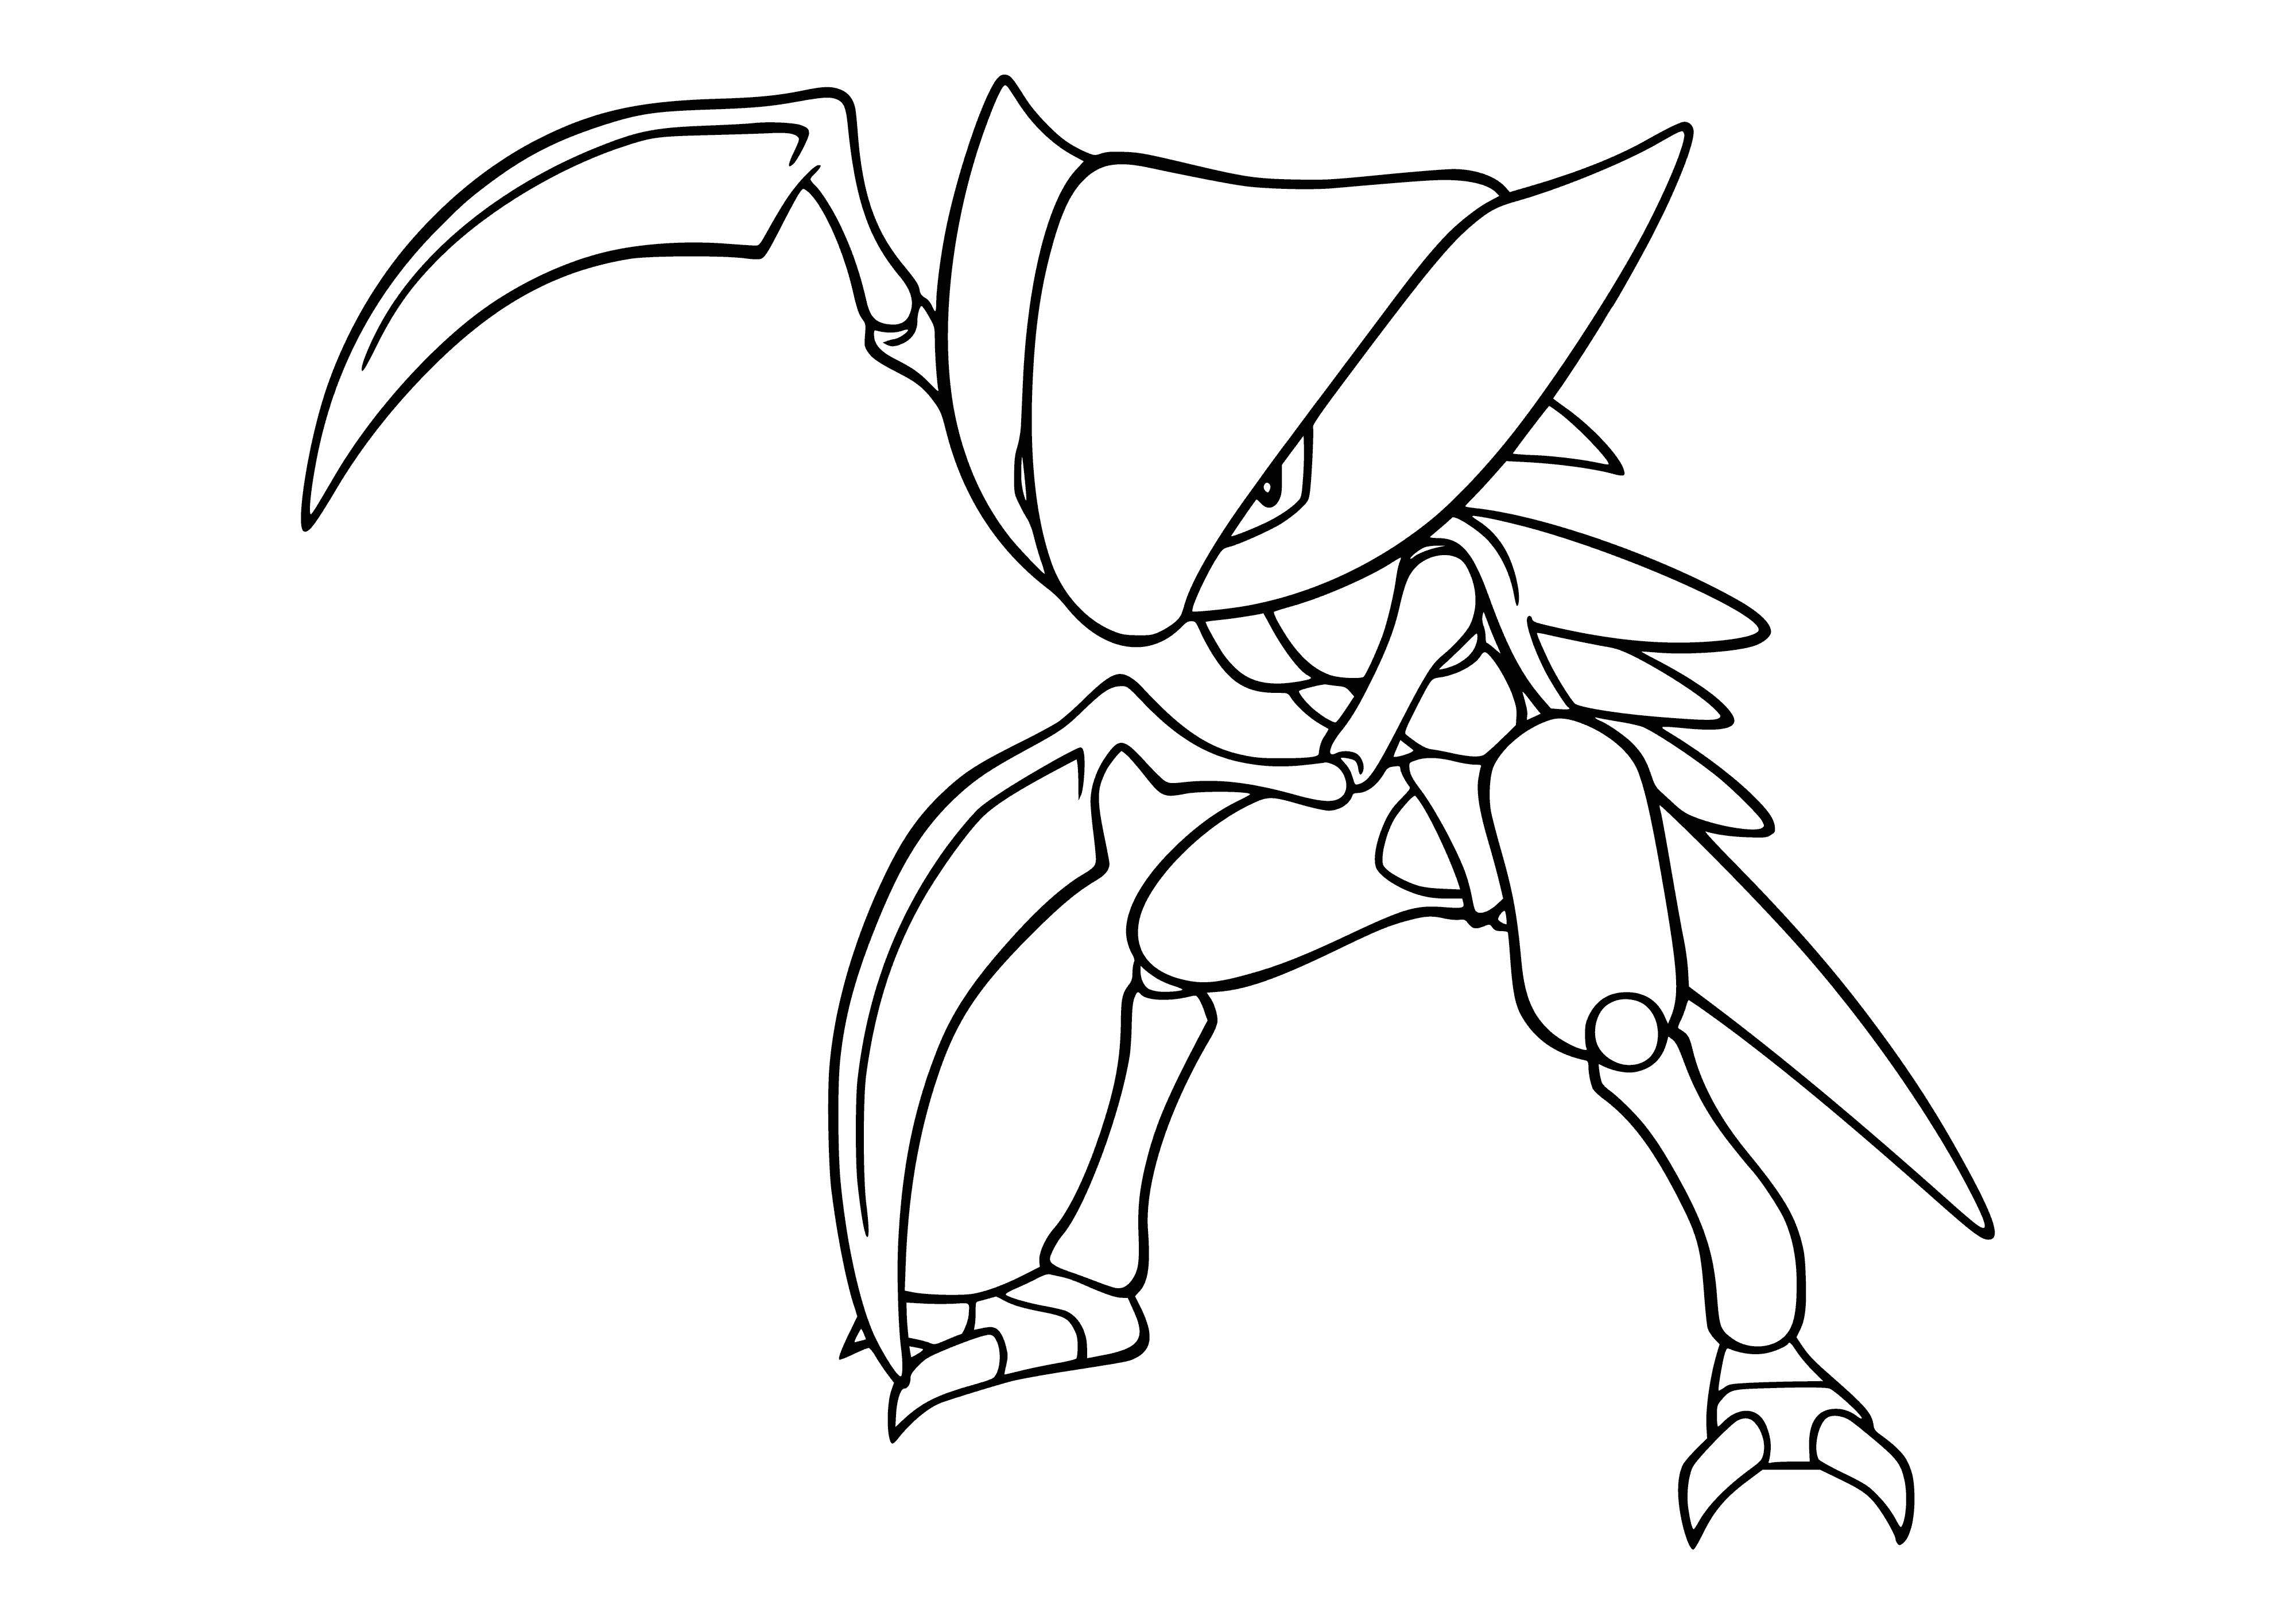 coloring page: Kabutops is a turtle-like, aggressive Pokemon with sickle-like claws. It's a Water/Rock-type, evolved from Kabuto. Dreaded foe of anything that moves!